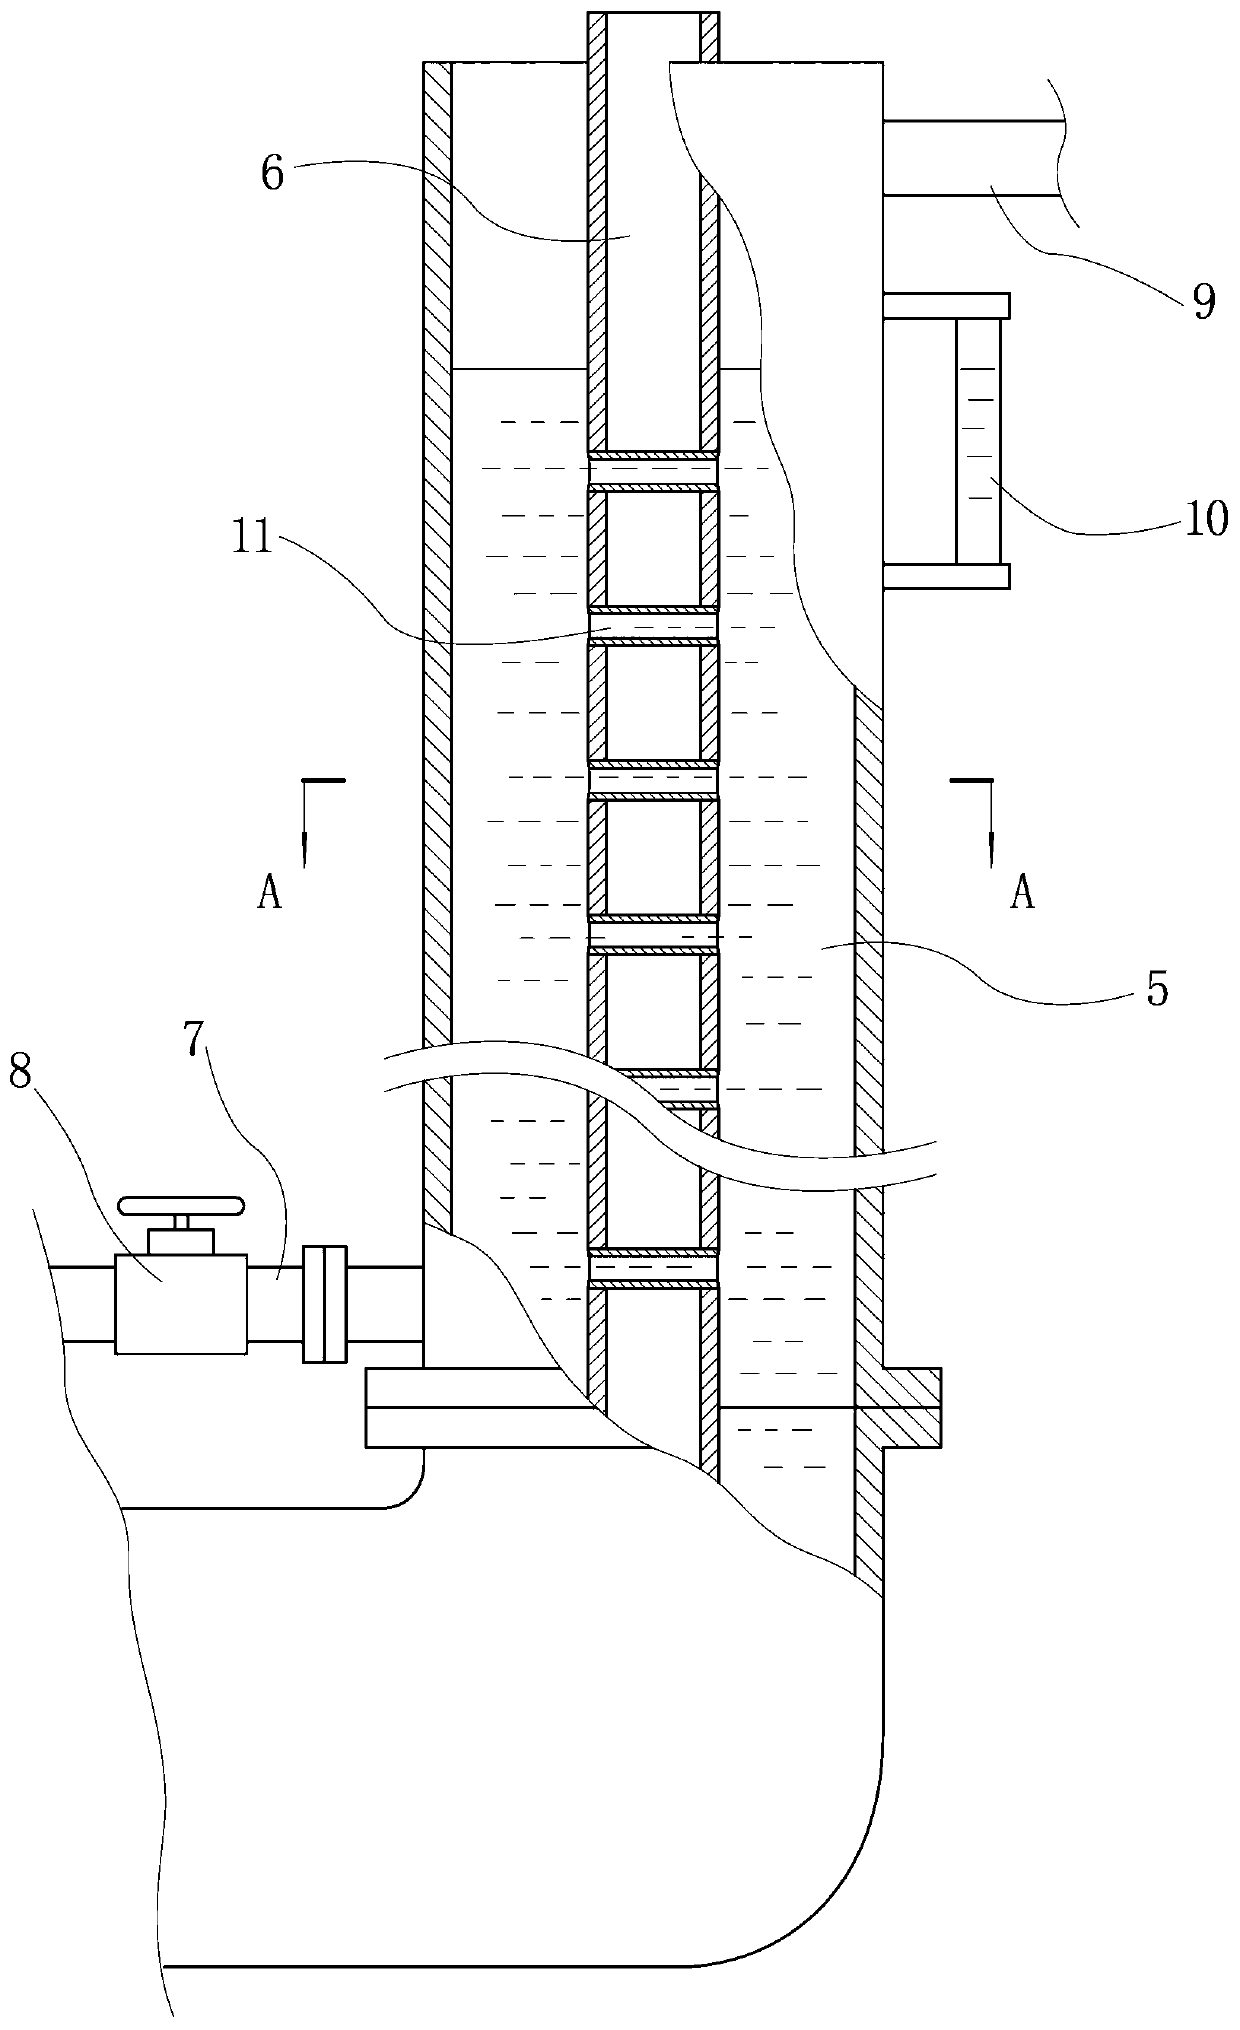 Heating device for food processing